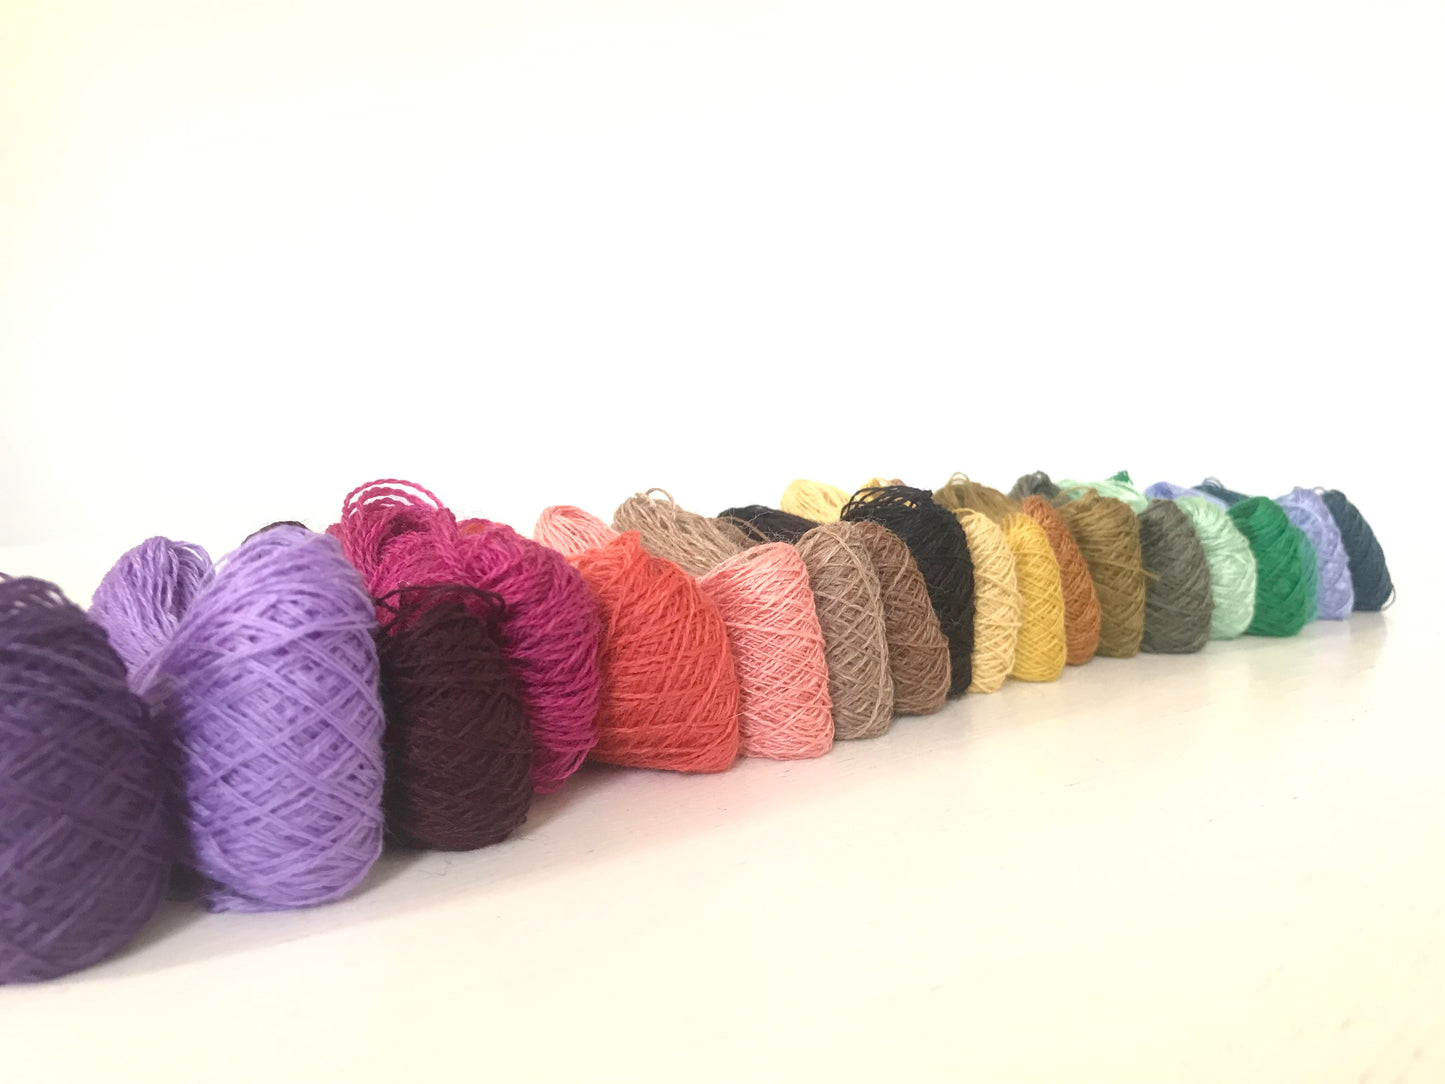 Yarn package for Top 2